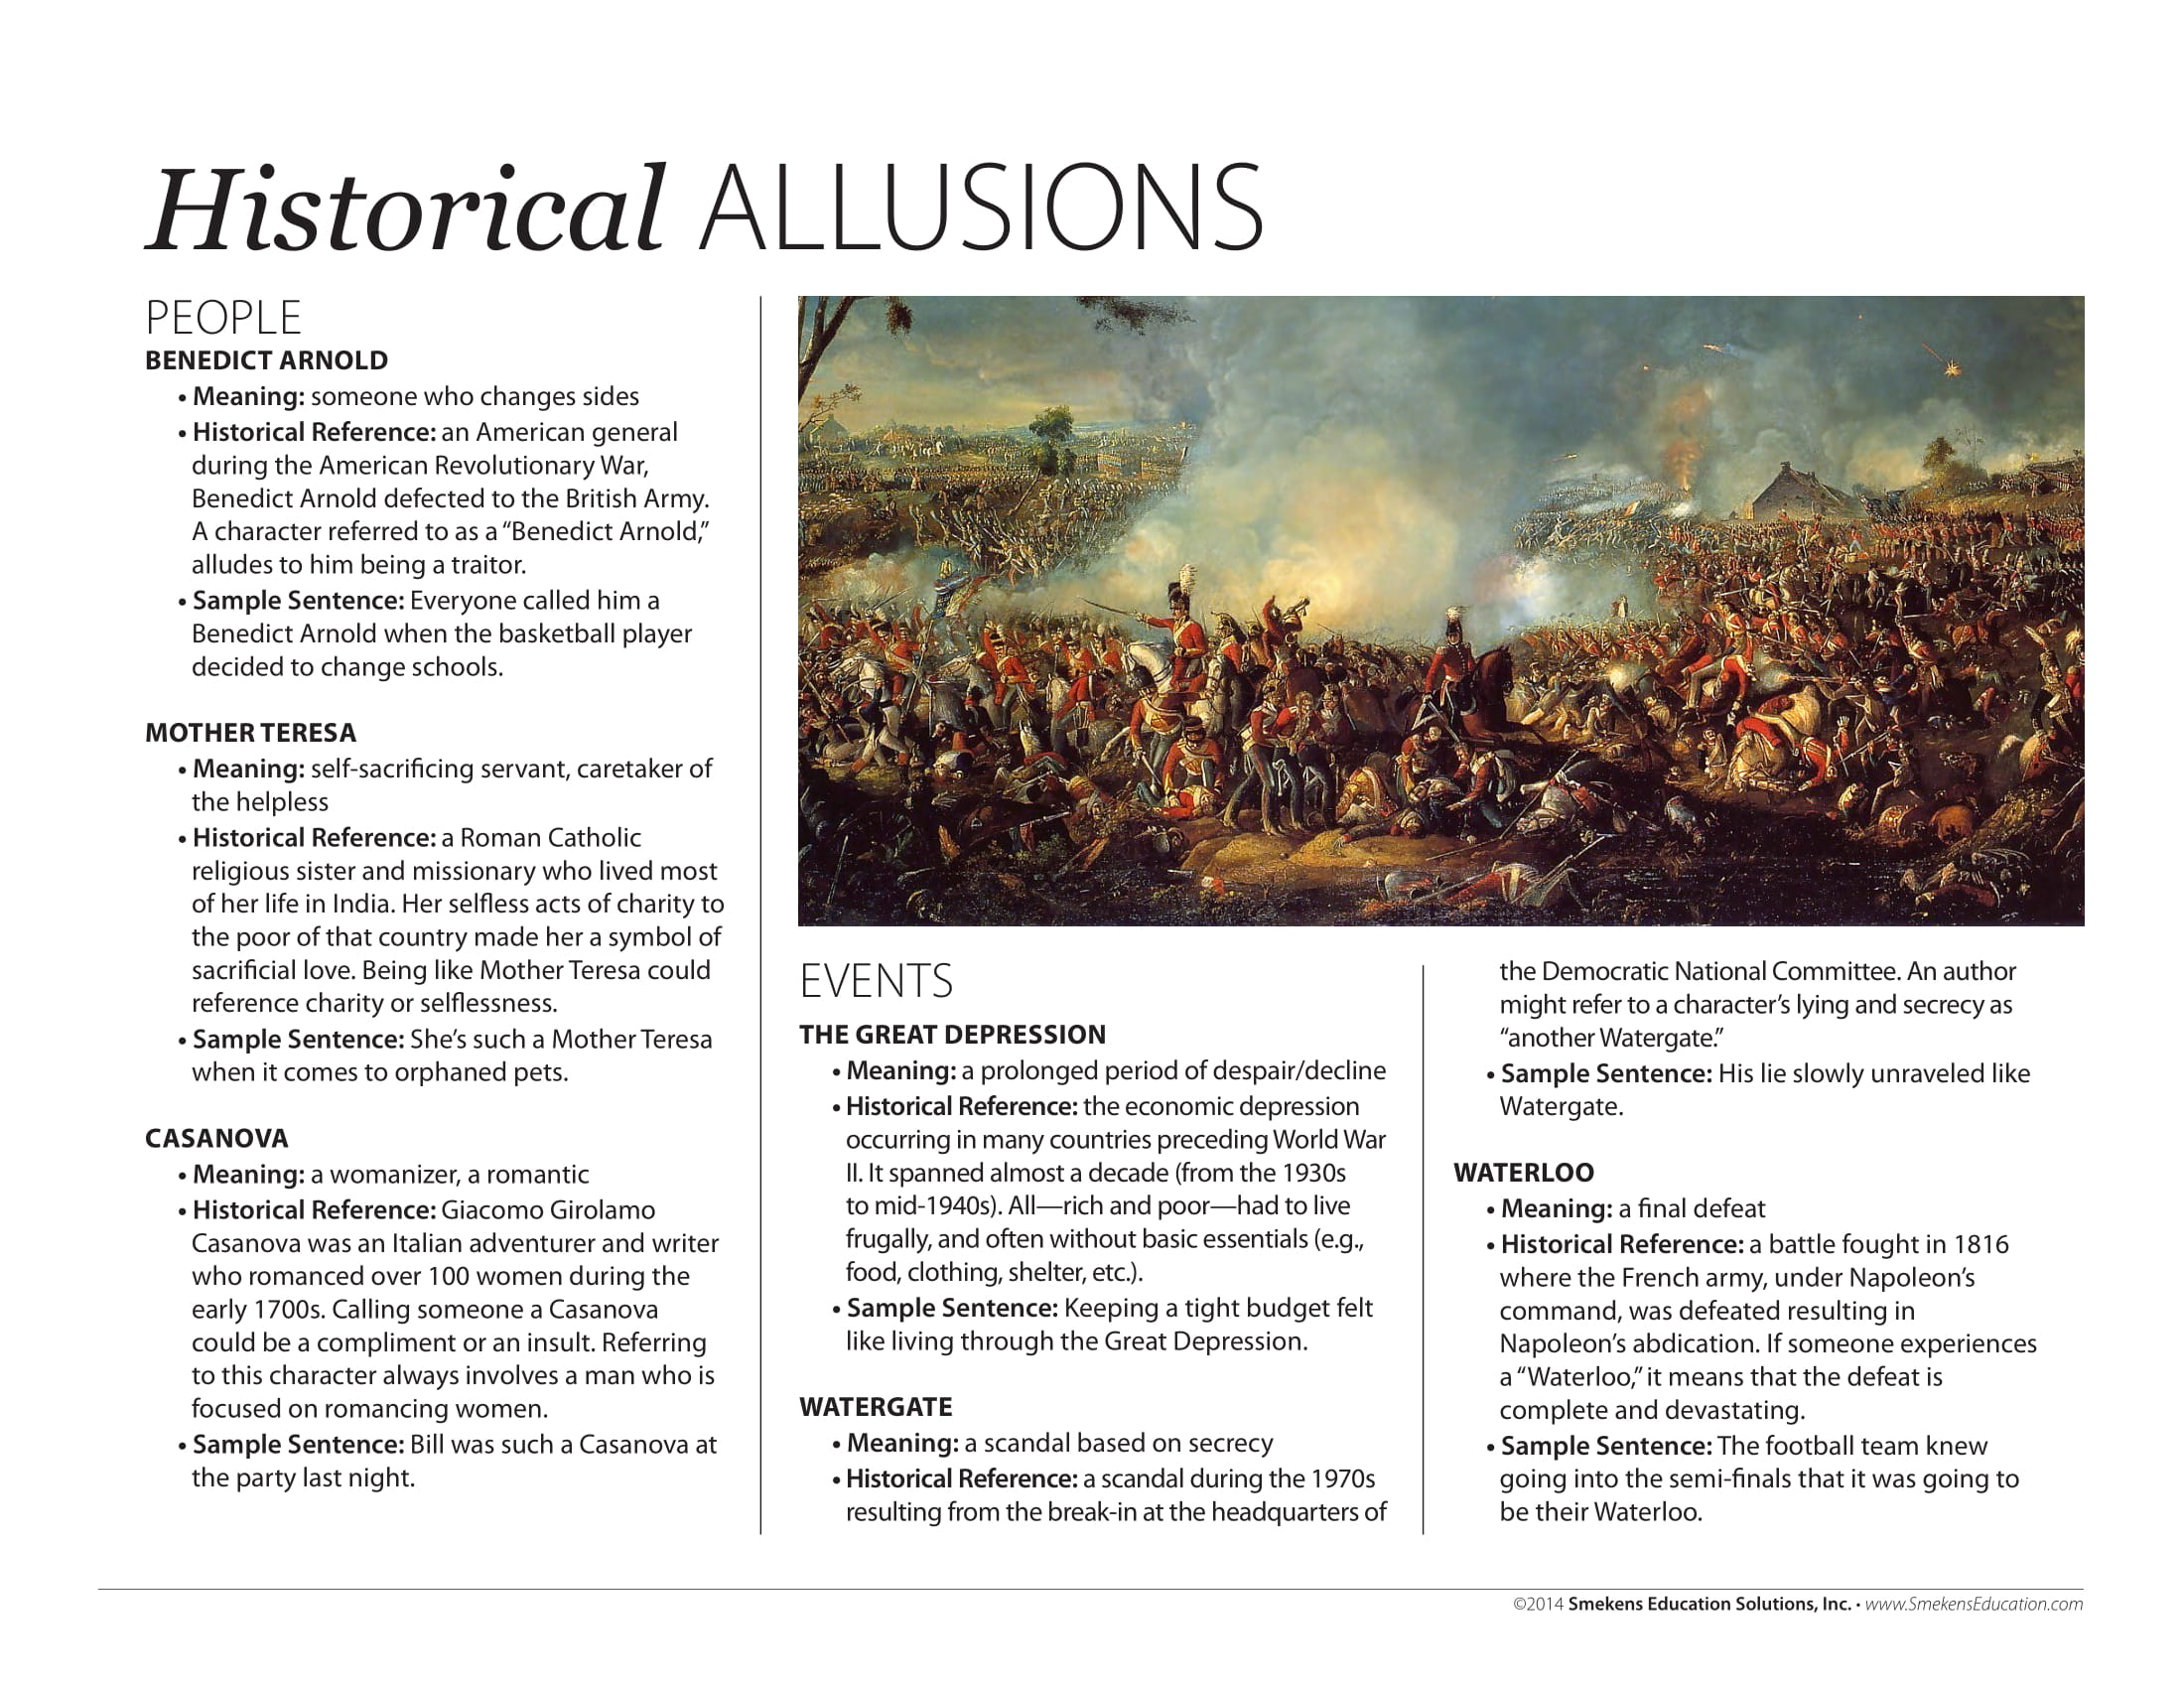 Historical Allusions Example 